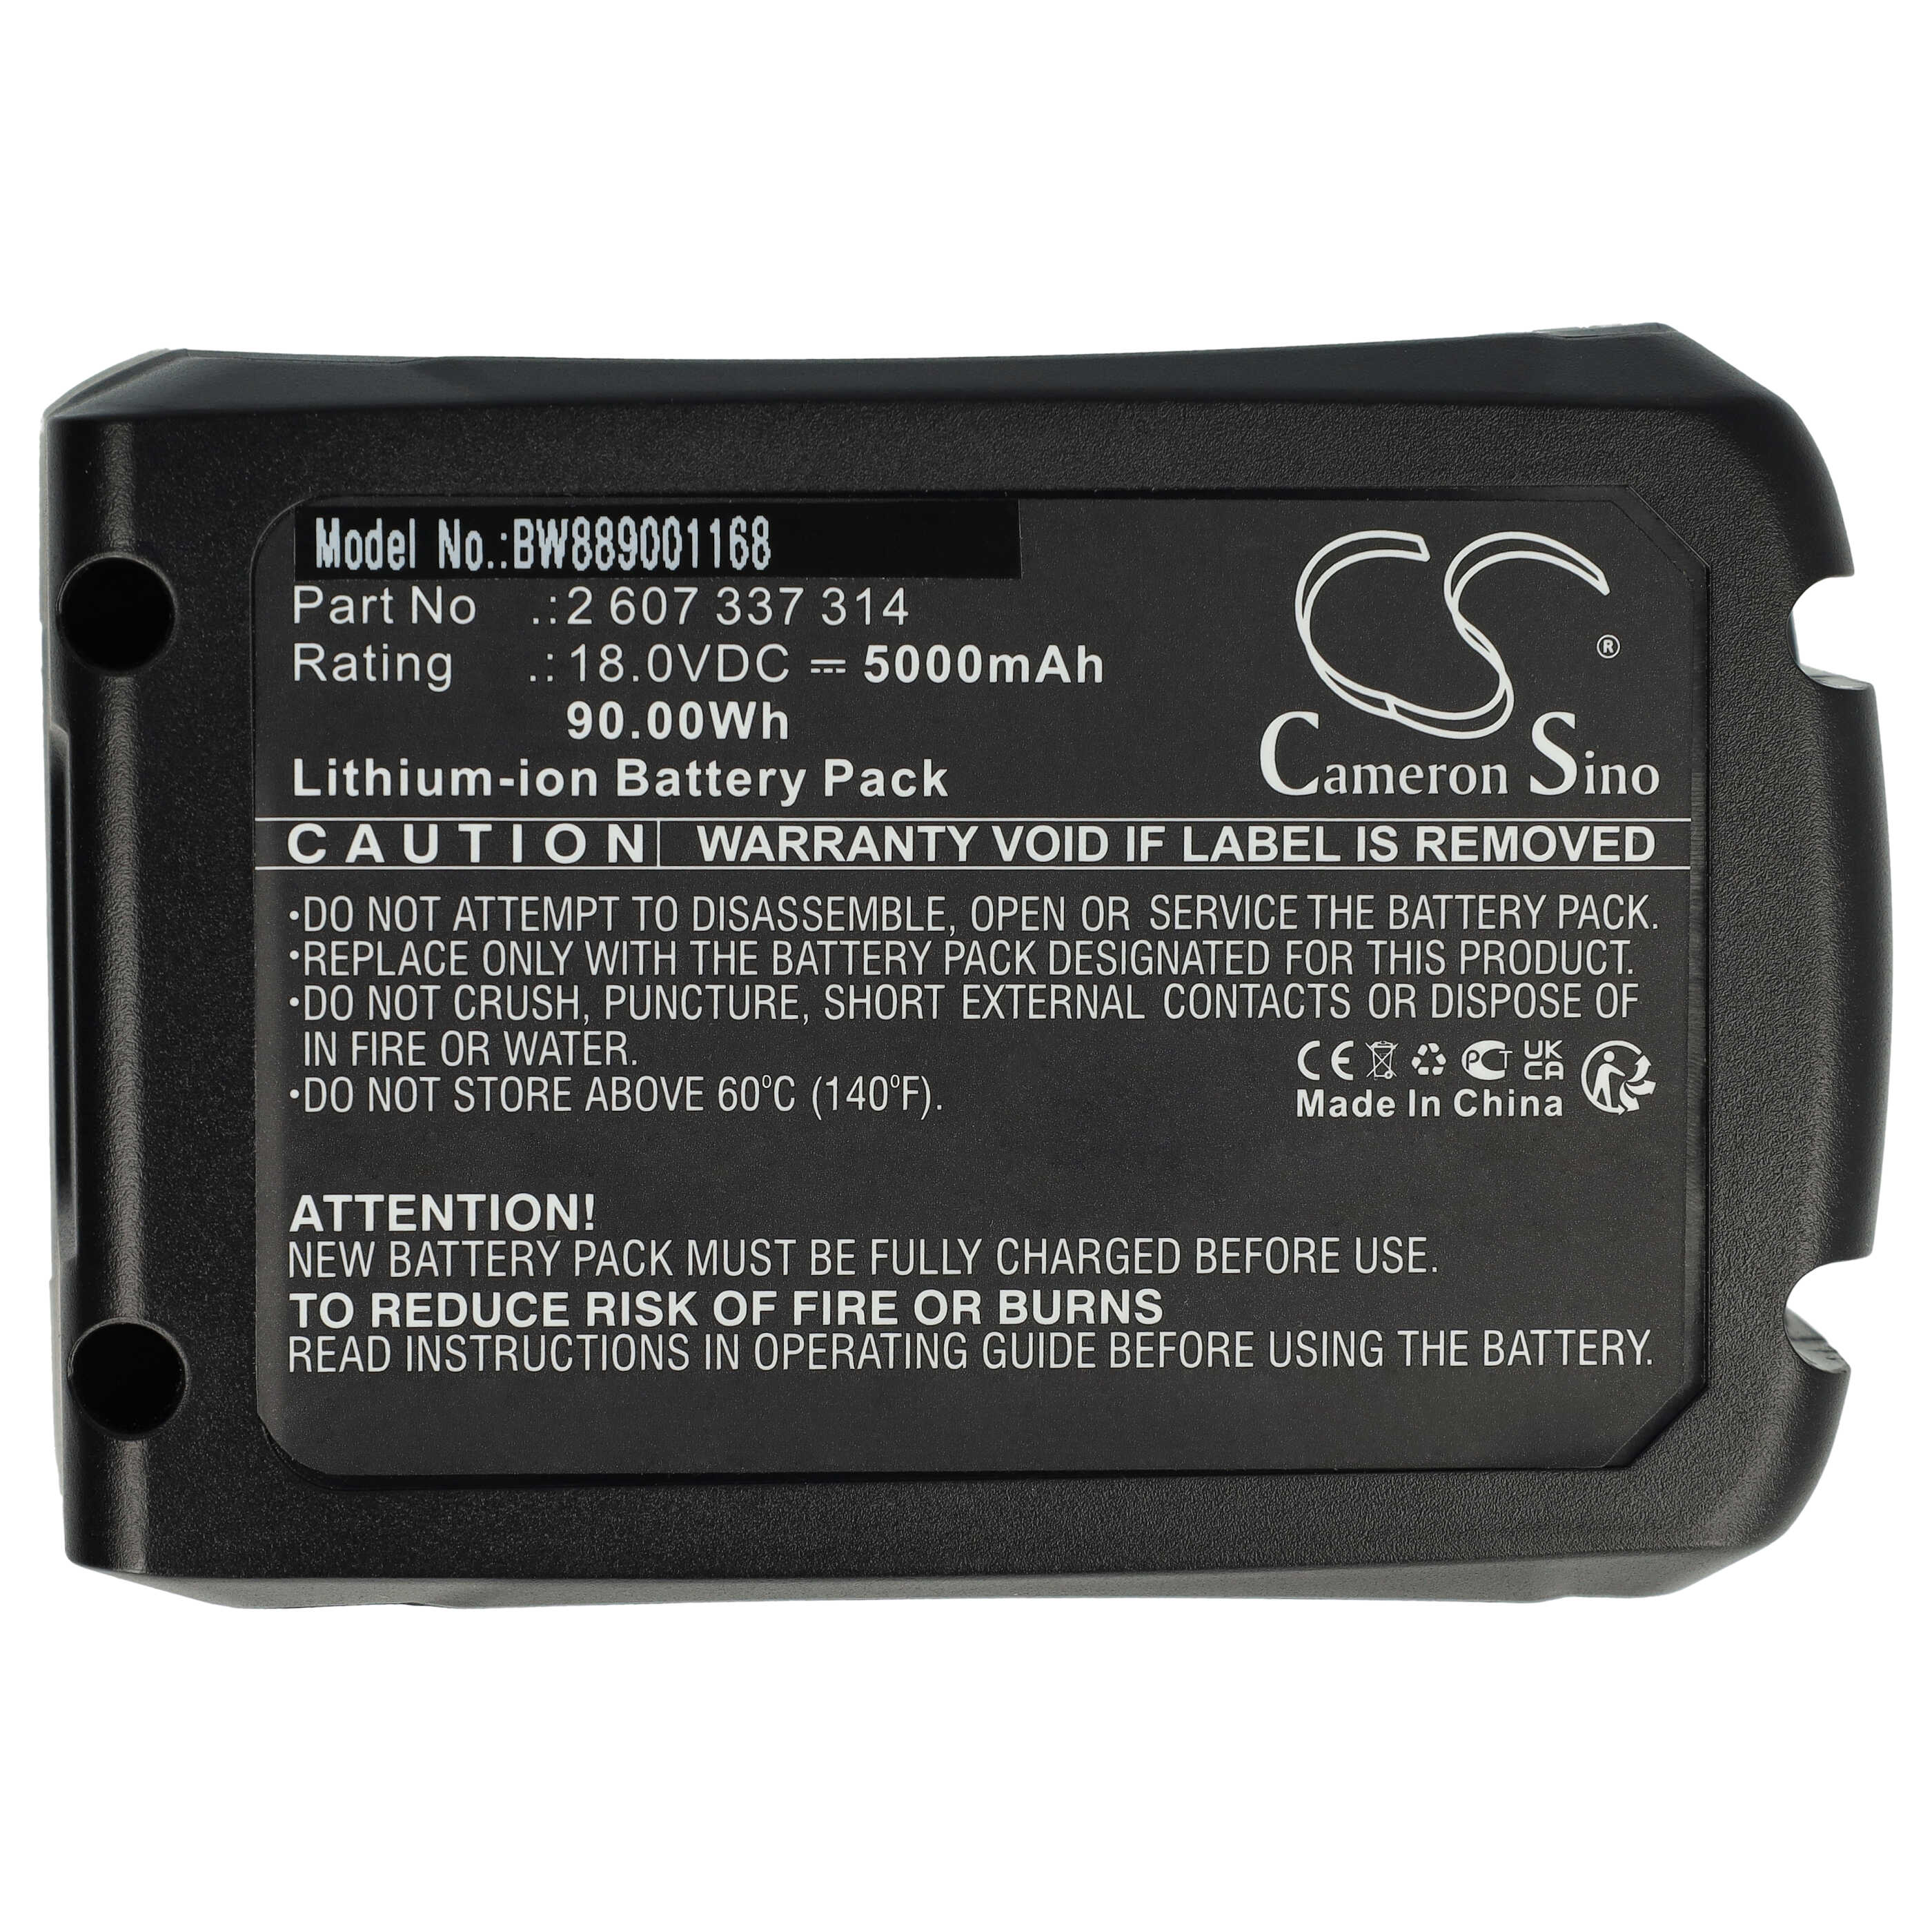 Lawnmower Battery Replacement for Bosch 17004934, 17006127, 17002207, 1600A005B0 - 5000mAh 18V Li-Ion